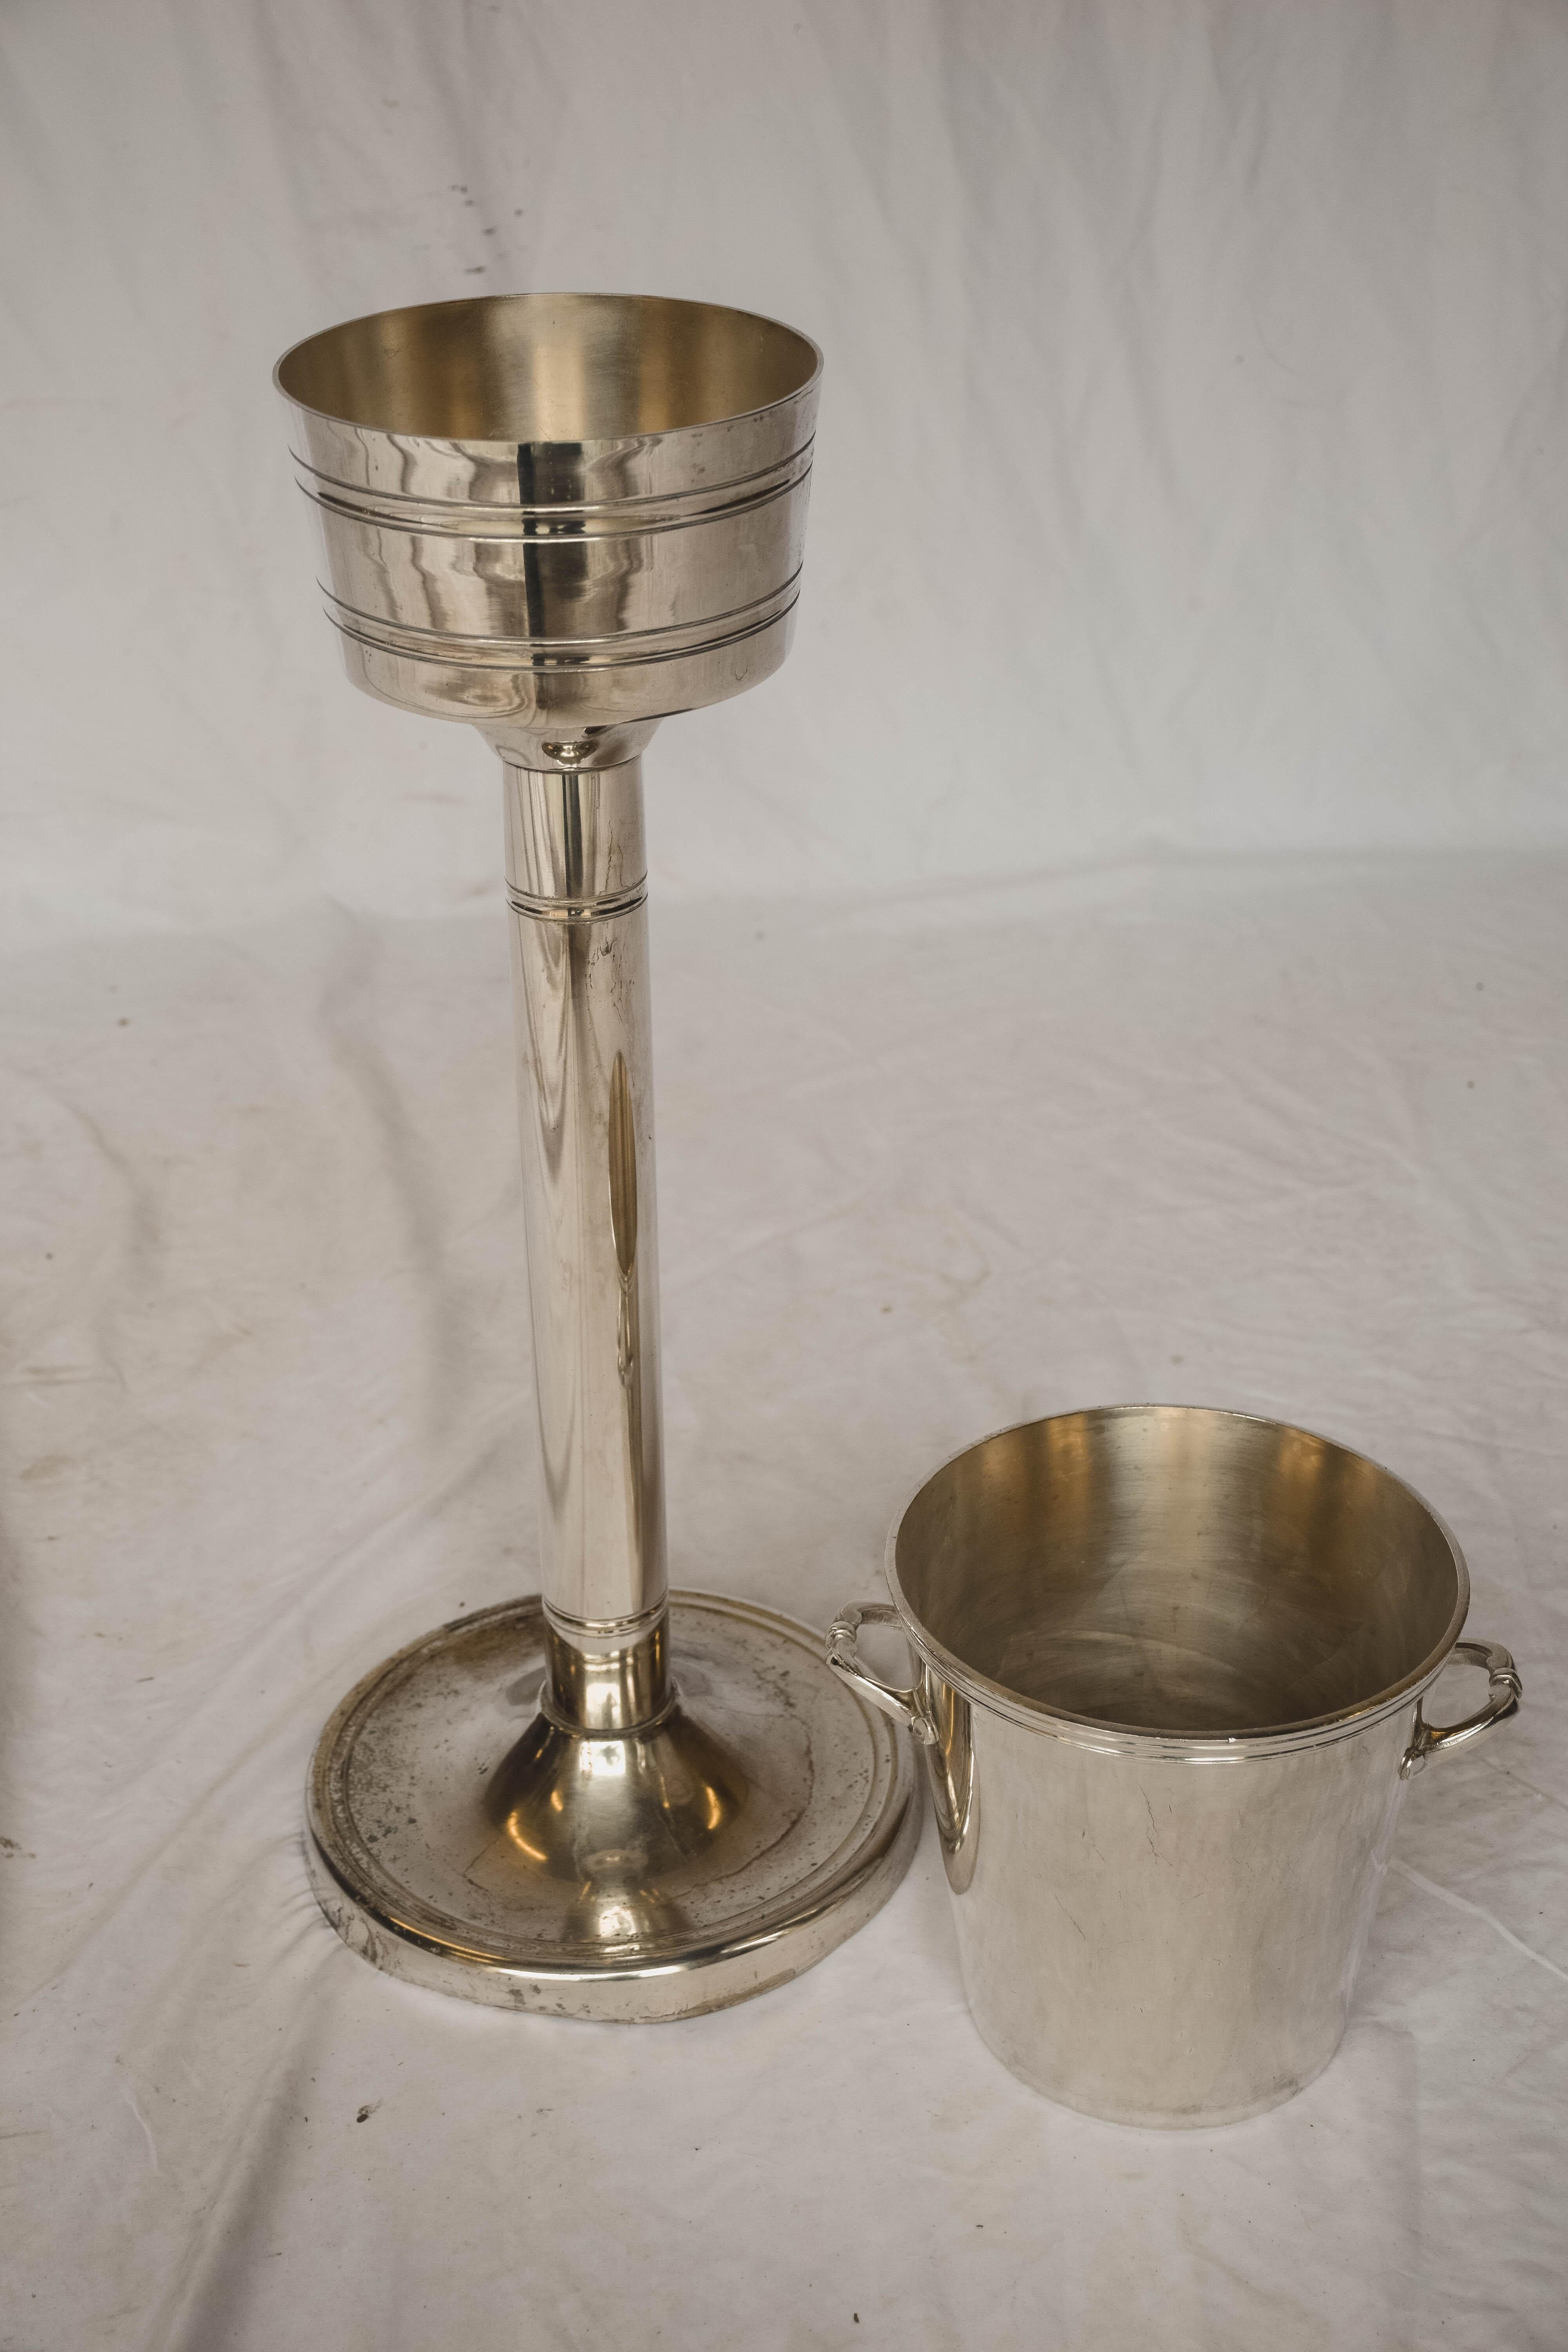 Hotel silver French champagne bucket with stand from the Lyon region of France. Most likely used in a restaurant or hotel. The bucket itself is easily removed from the stand as seen in the photos.